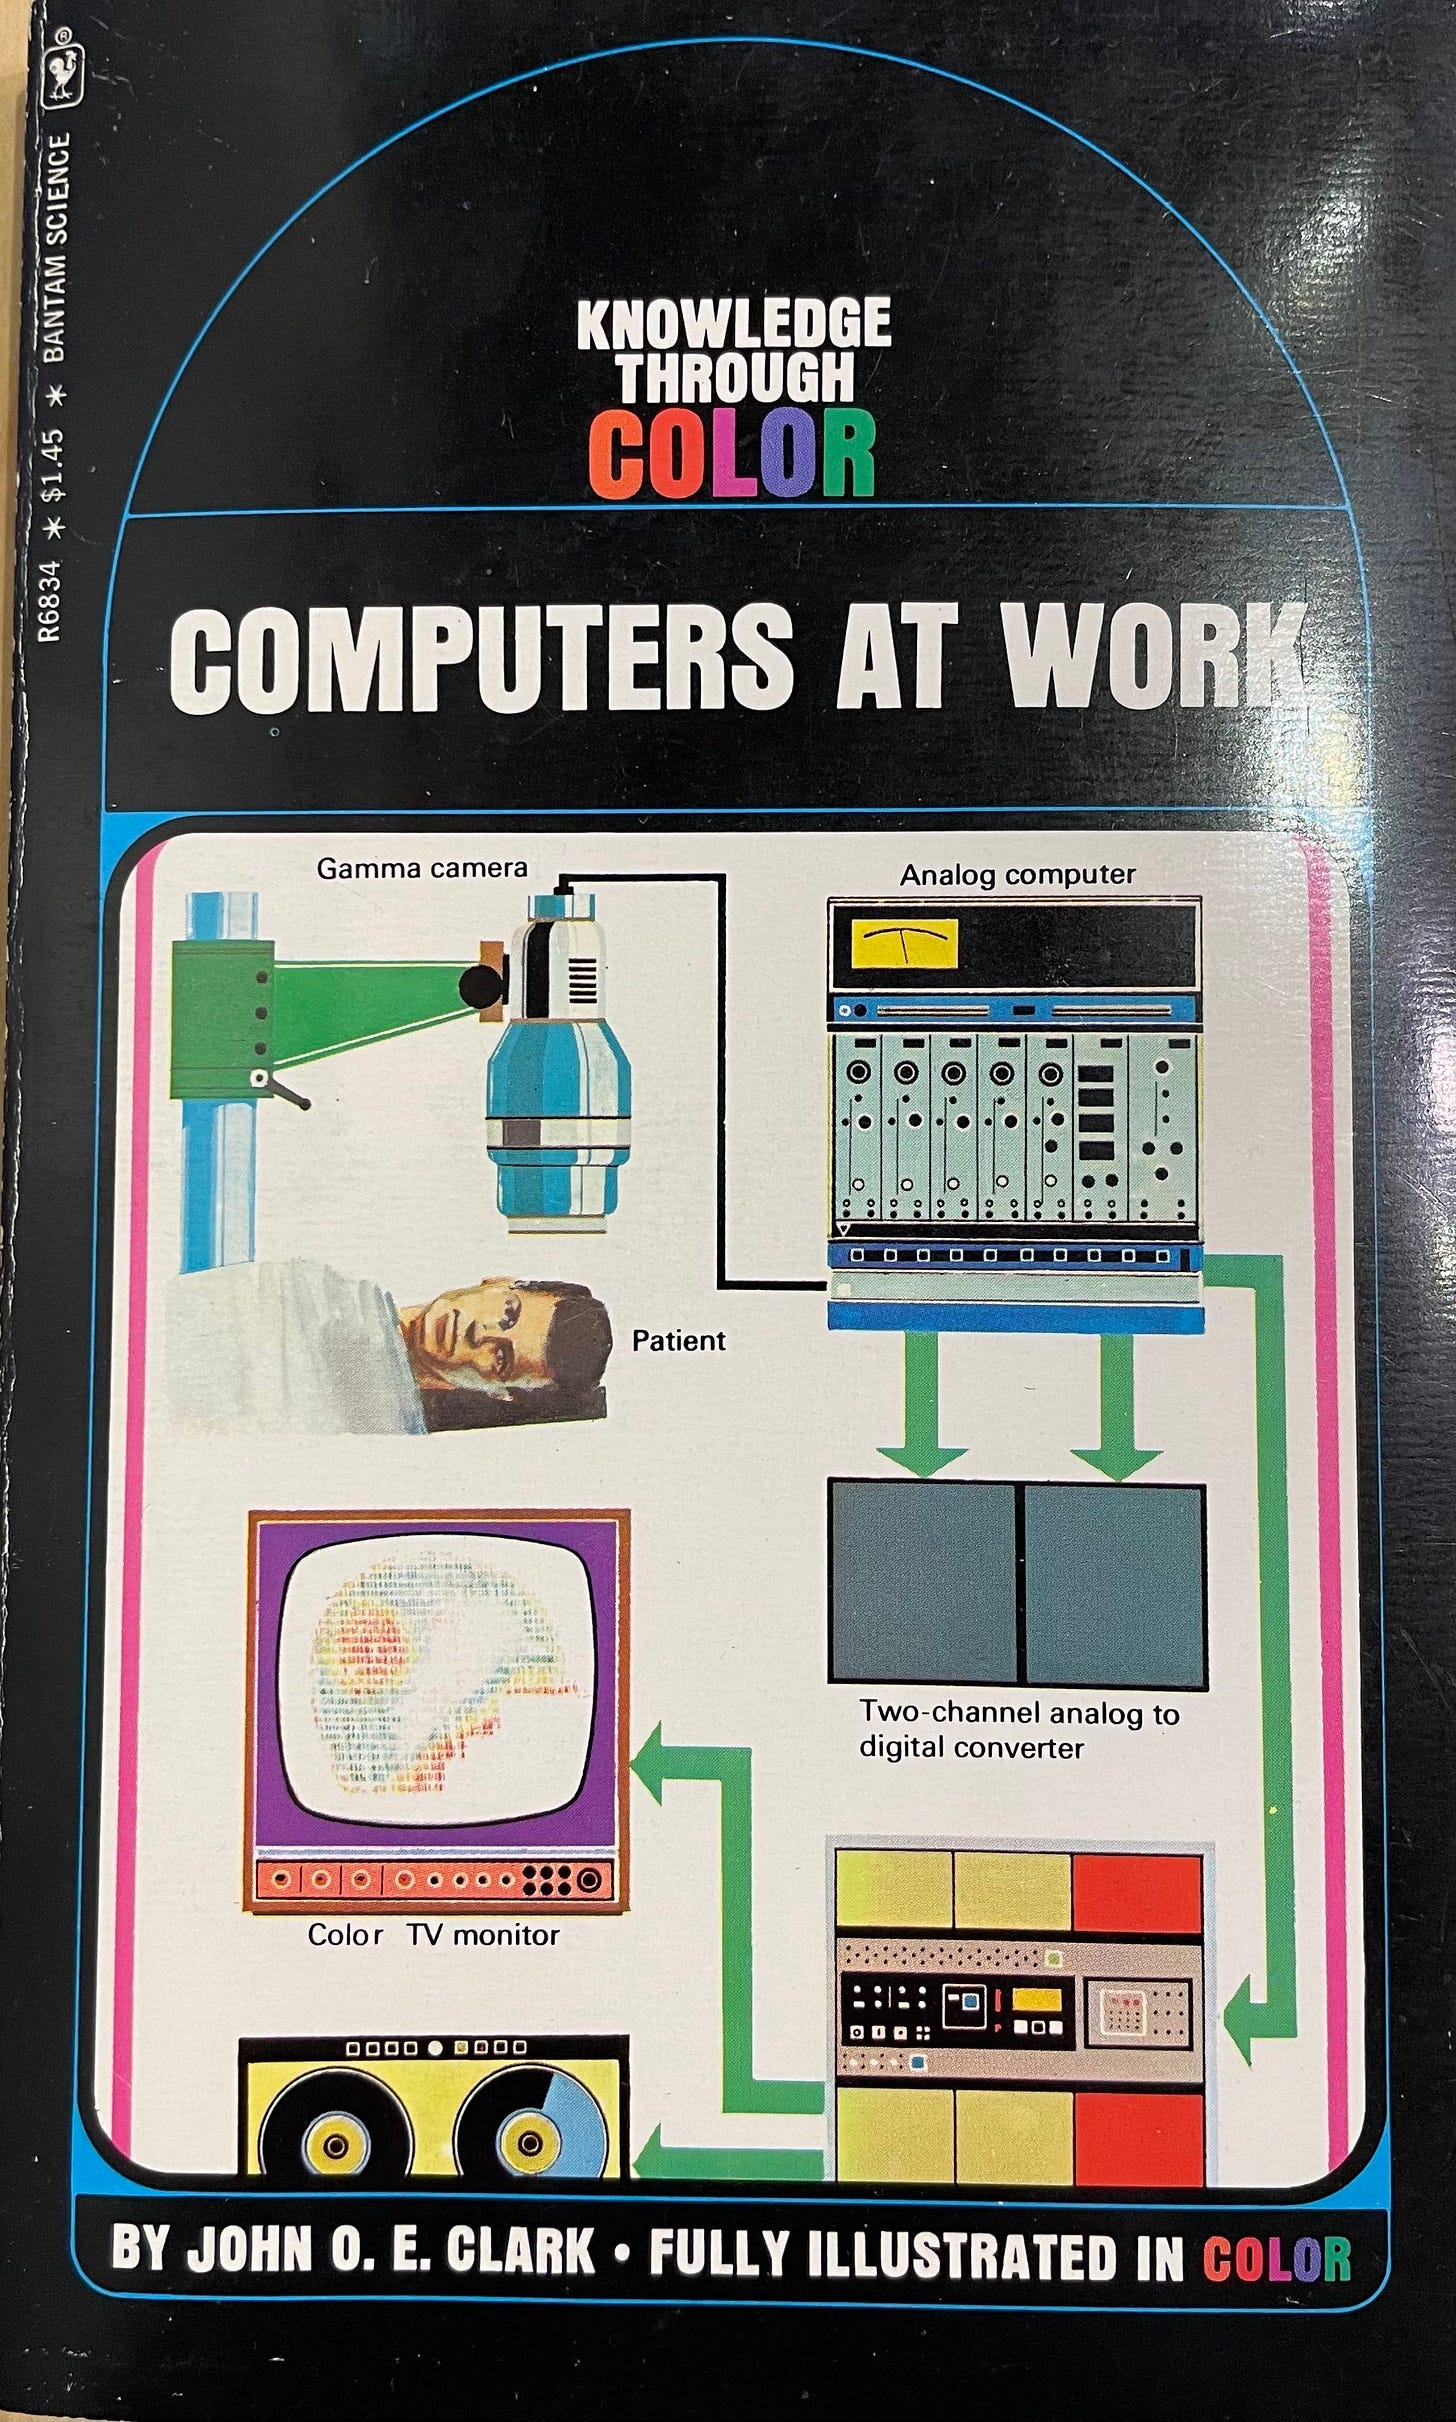 cover for small paperback titled COMPUTERS AT WORK by John O.E. Clark. indicates it is part of the "knowledge through colour" series". black background, white text, with illustration showing a flow chart from an analog computer to gamma camera and patient, two-channel analog to digital converter, color tv monitor, and two other unlabeled illustrations of machines